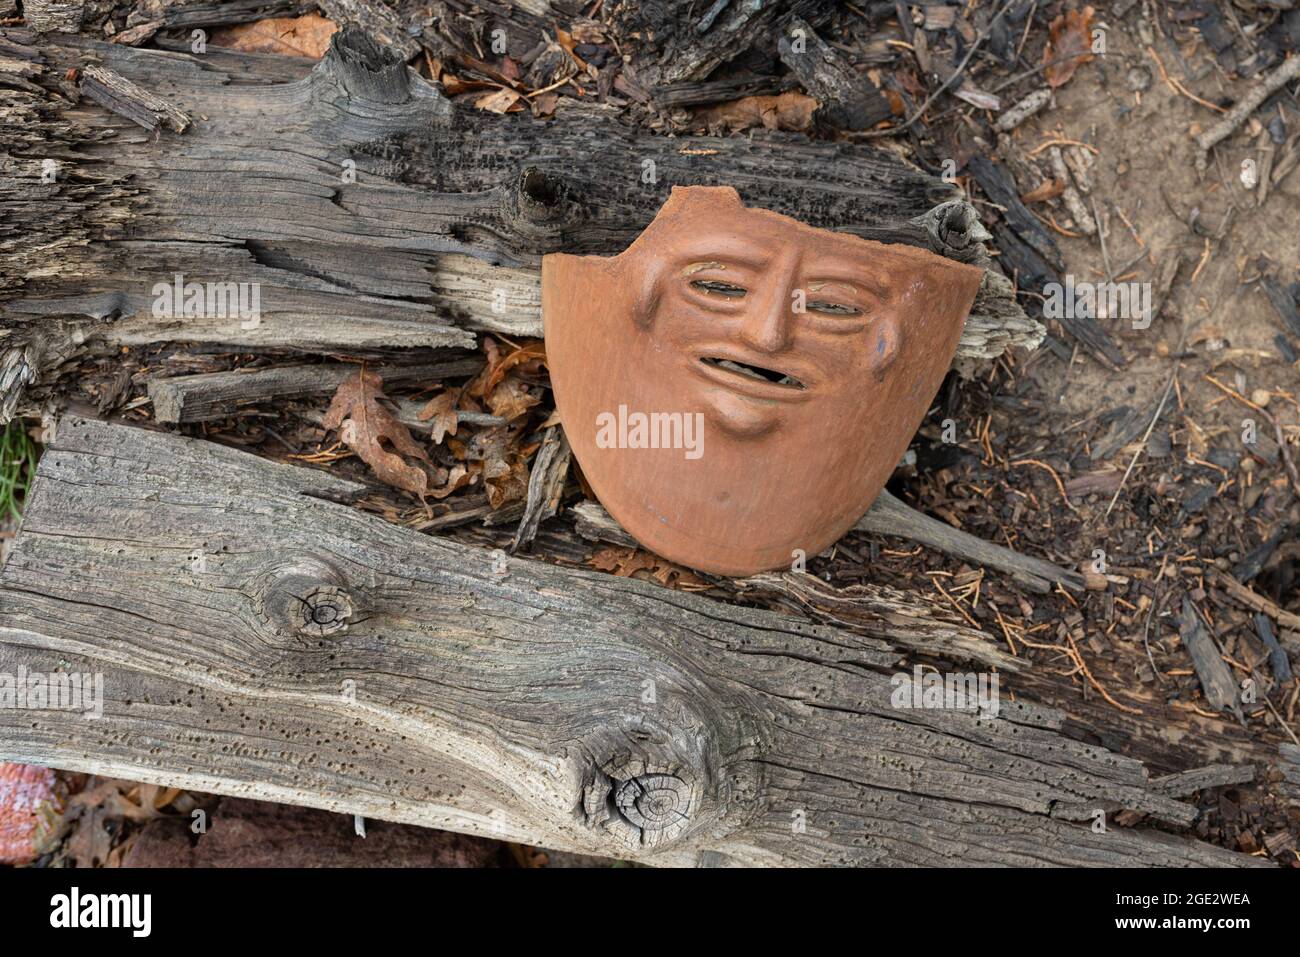 A discarded broken clay mask lying on on the ground atop a rotting log, dried leaves and twigs. Stock Photo